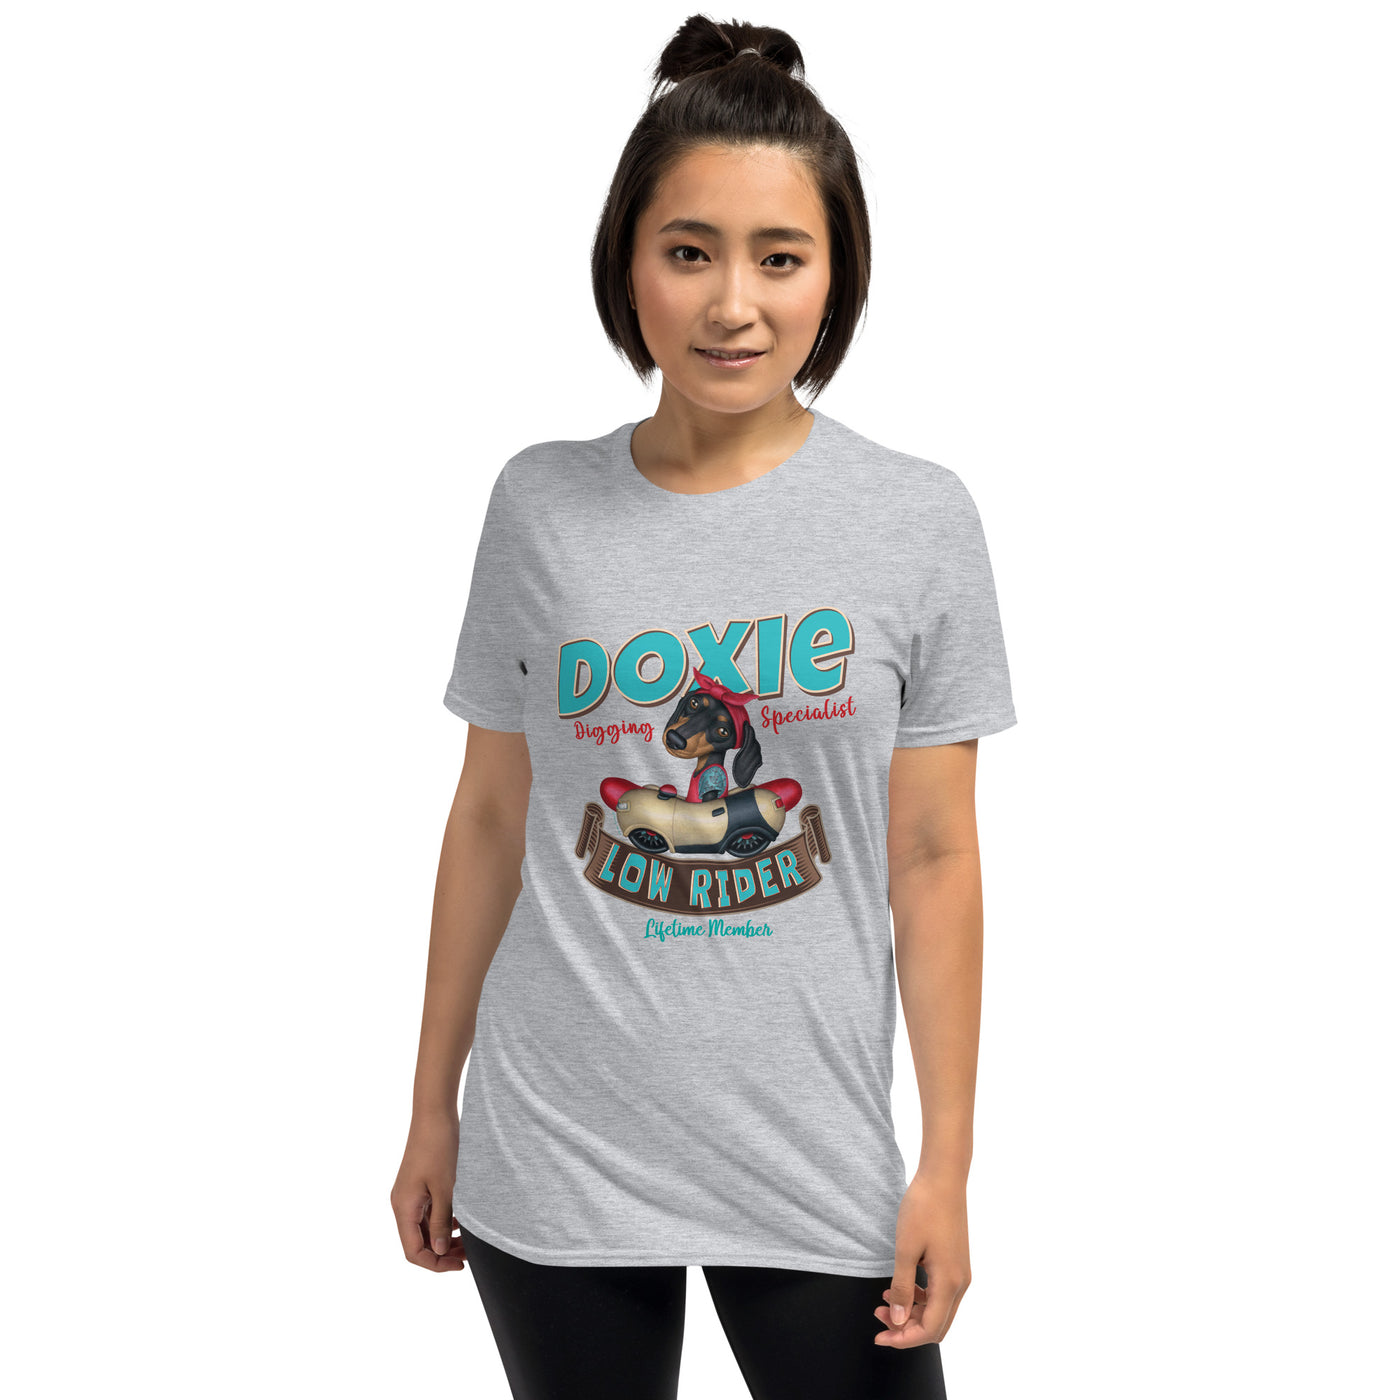 Funny Doxie Dog in a classic car on a Low Rider Dachshund Unisex T-Shirt